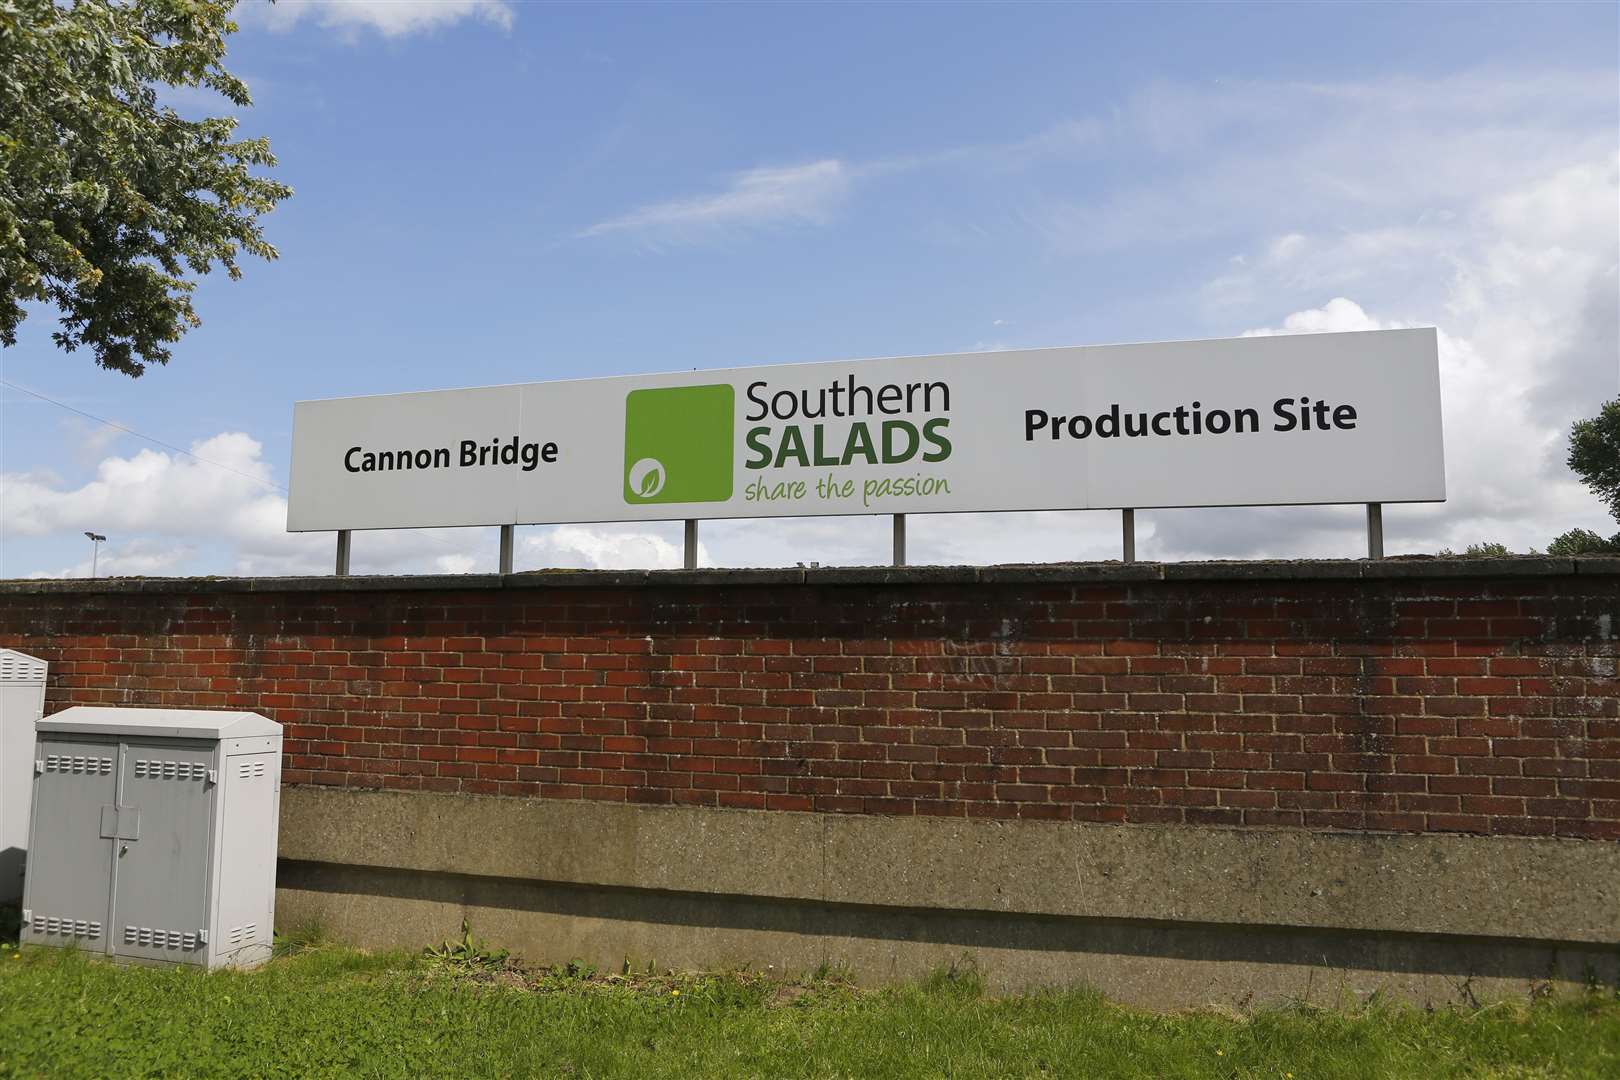 Southern Salads is based in Tonbridge